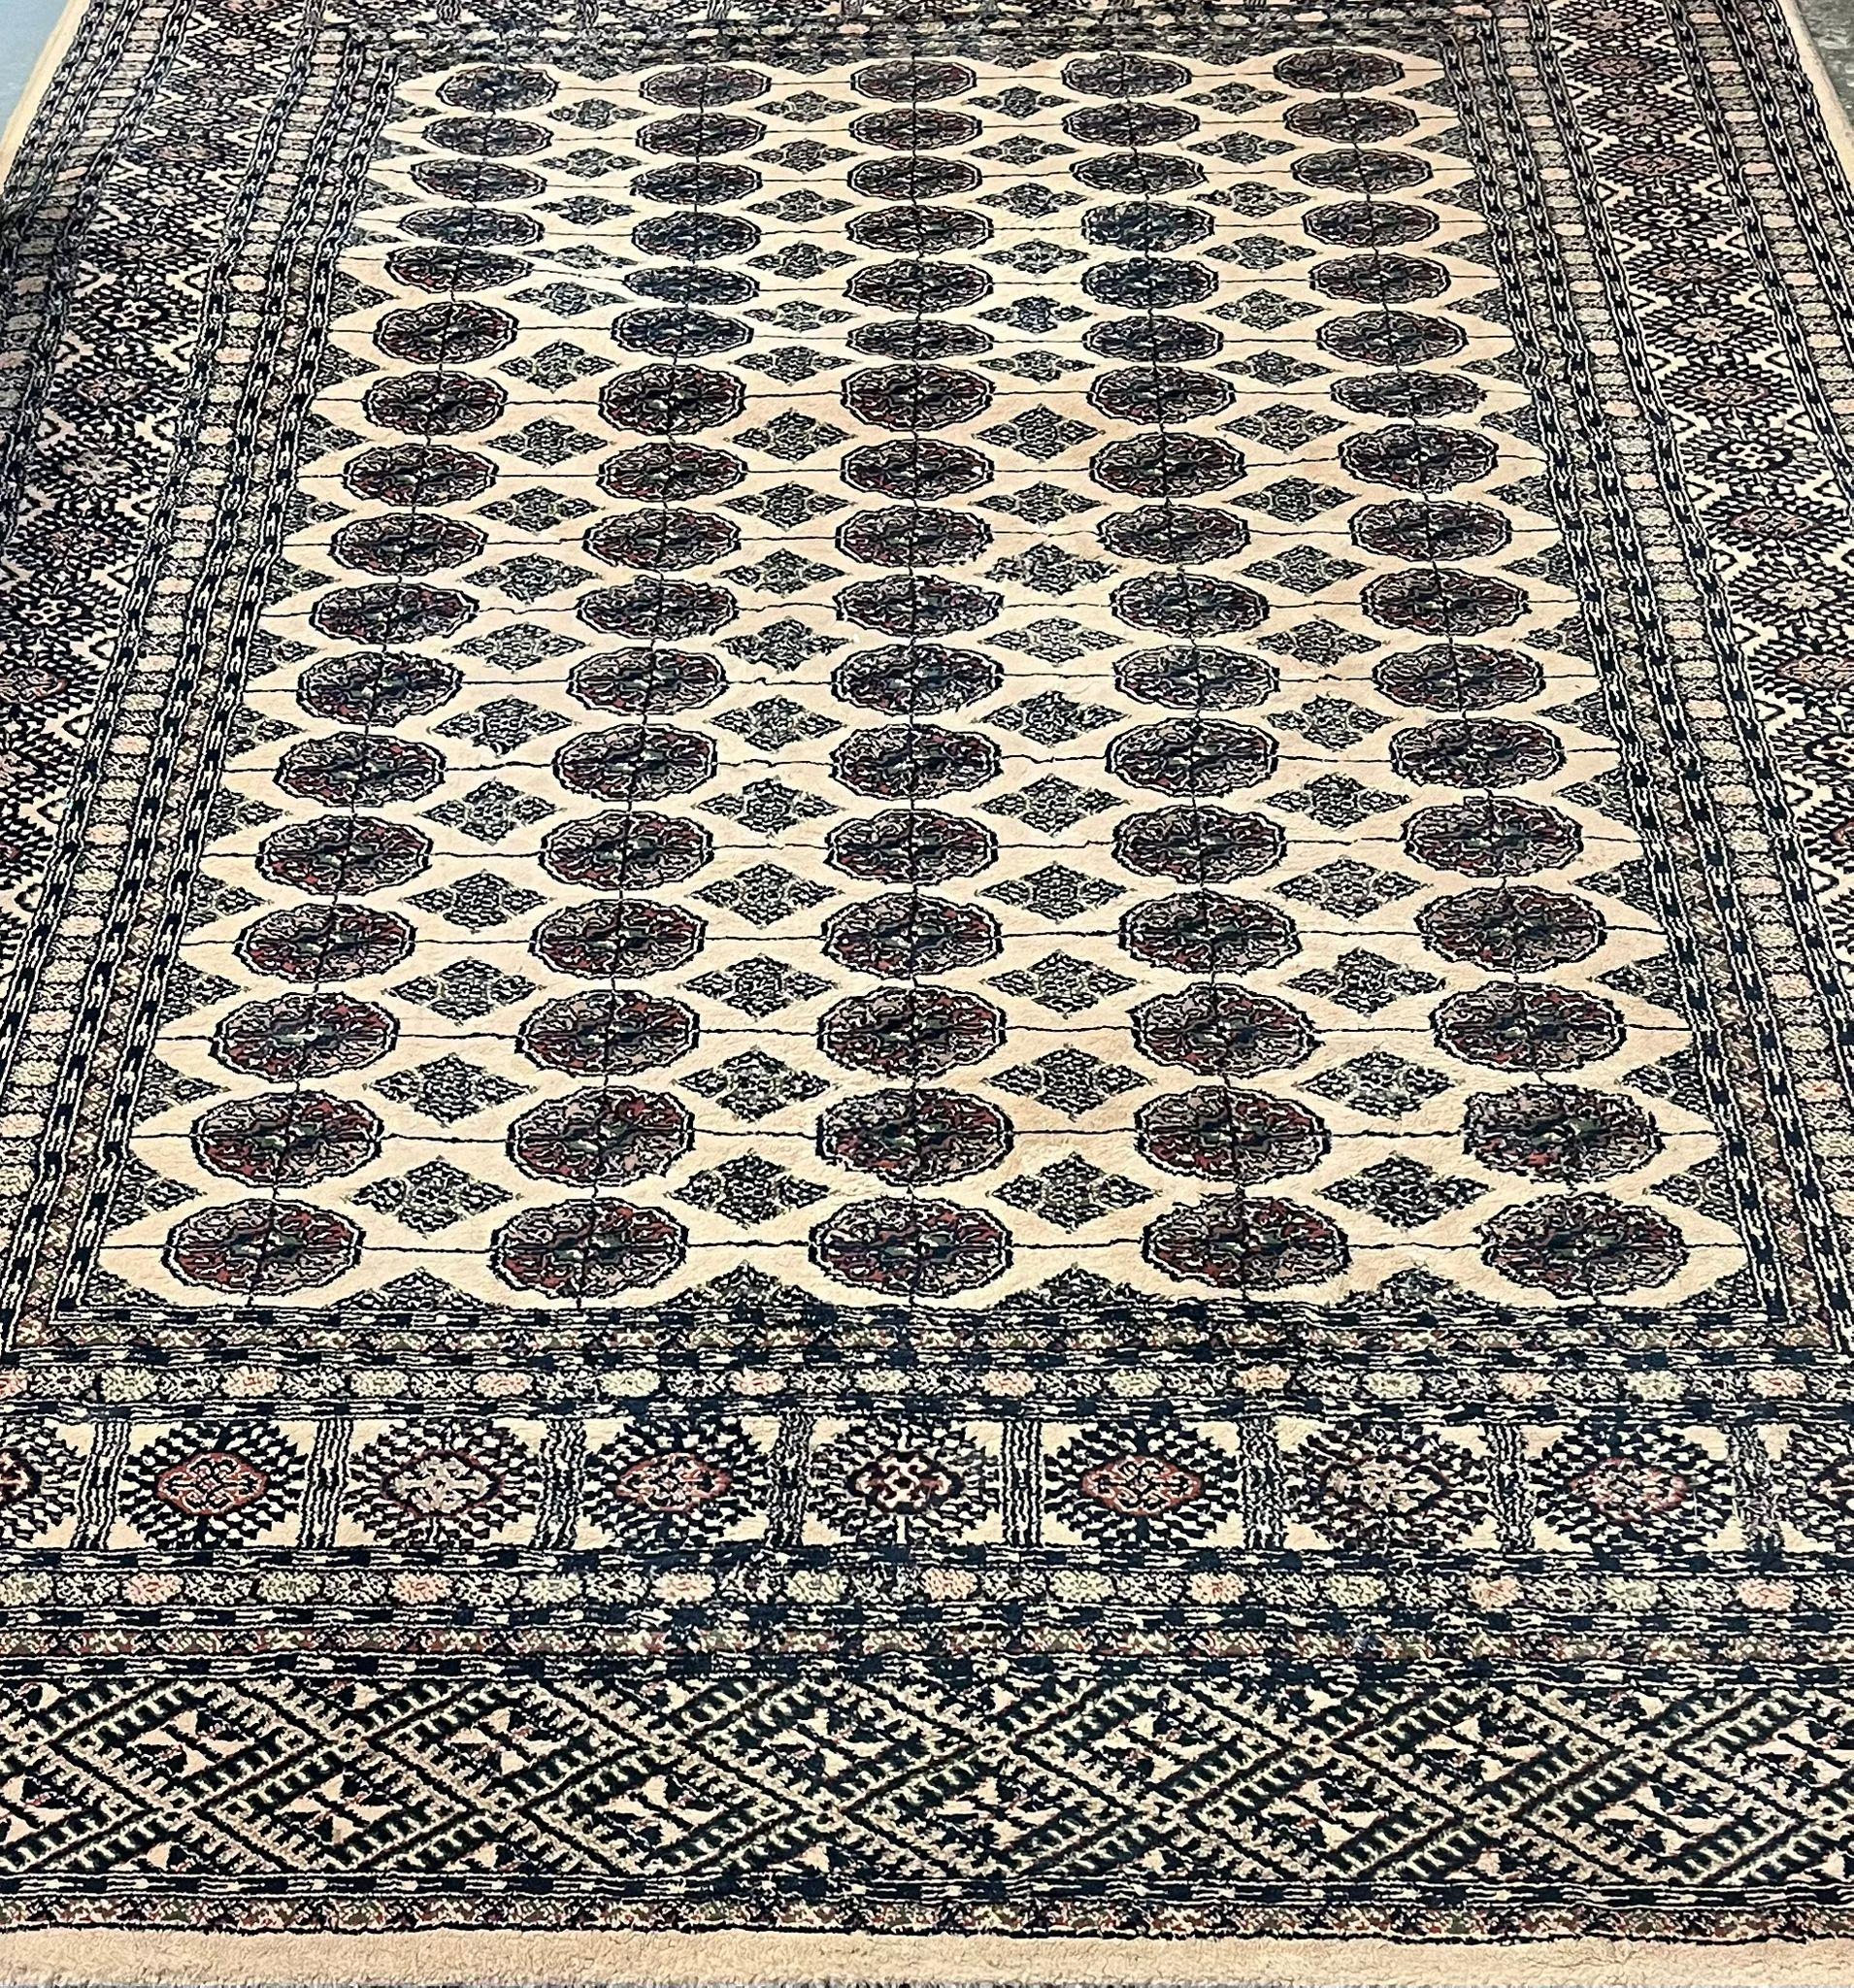 Middle Eastern design, probably Pakistan, beige ground Bokhara rug. 160x227cm approx. (B.P. 21% +